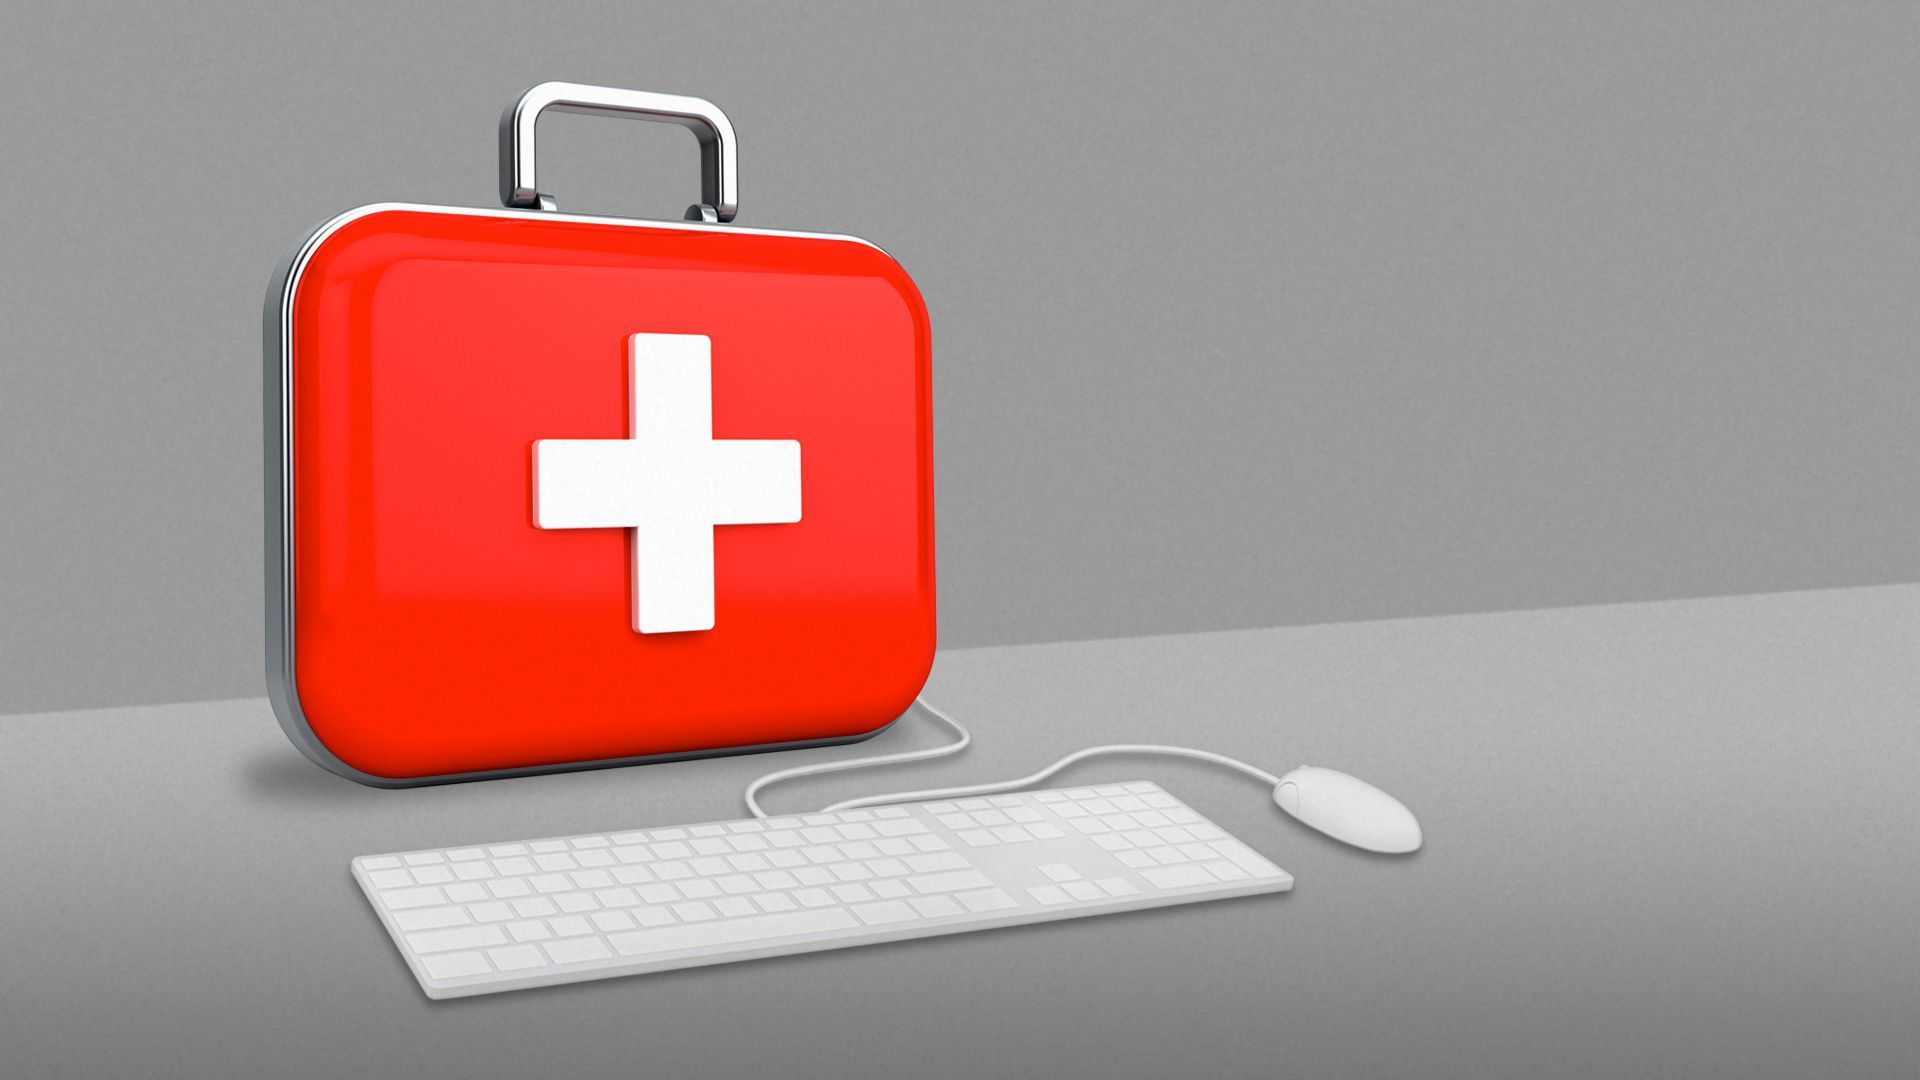 An illustration of a medical kit connected to a keyboard and mouse.